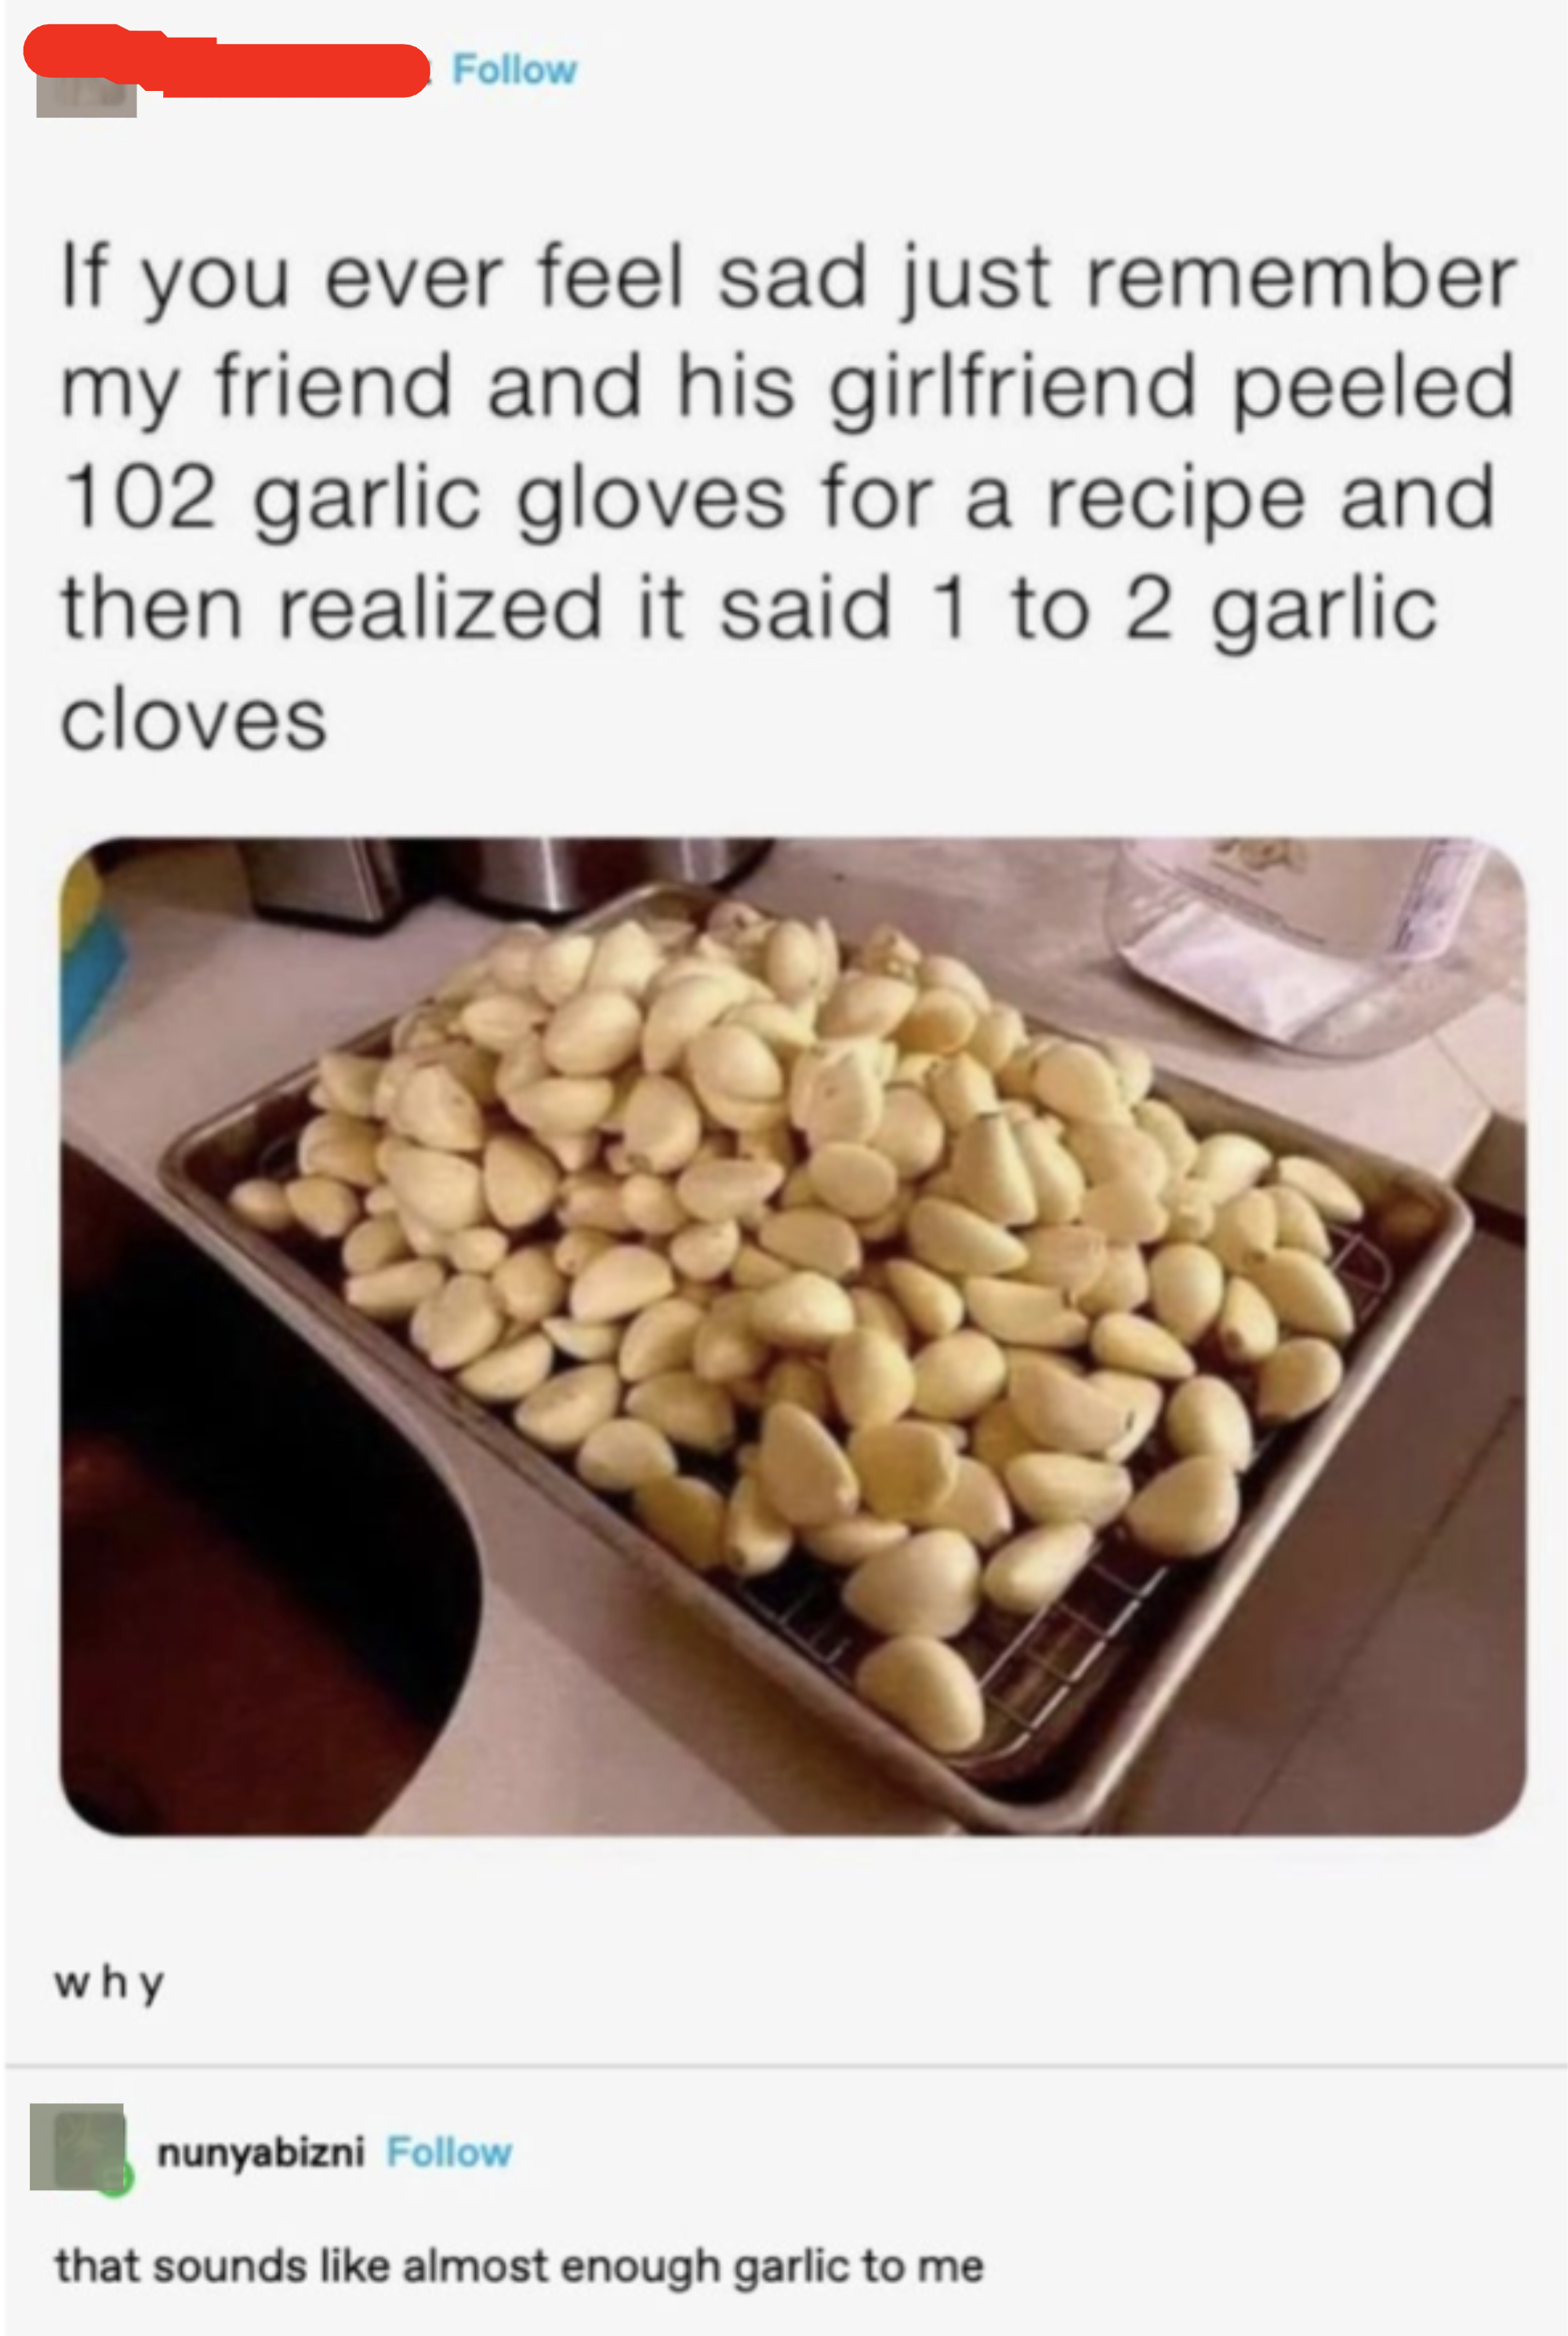 &quot;If you ever feel said, just remember my friend and his girlfriend peeled 102 garlic cloves for a recipe and then realized it said 1 to 2 garlic cloves,&quot; with a rack of cloves shown, with response: &quot;that sounds like almost enough garlic to me&quot;&quot;I li